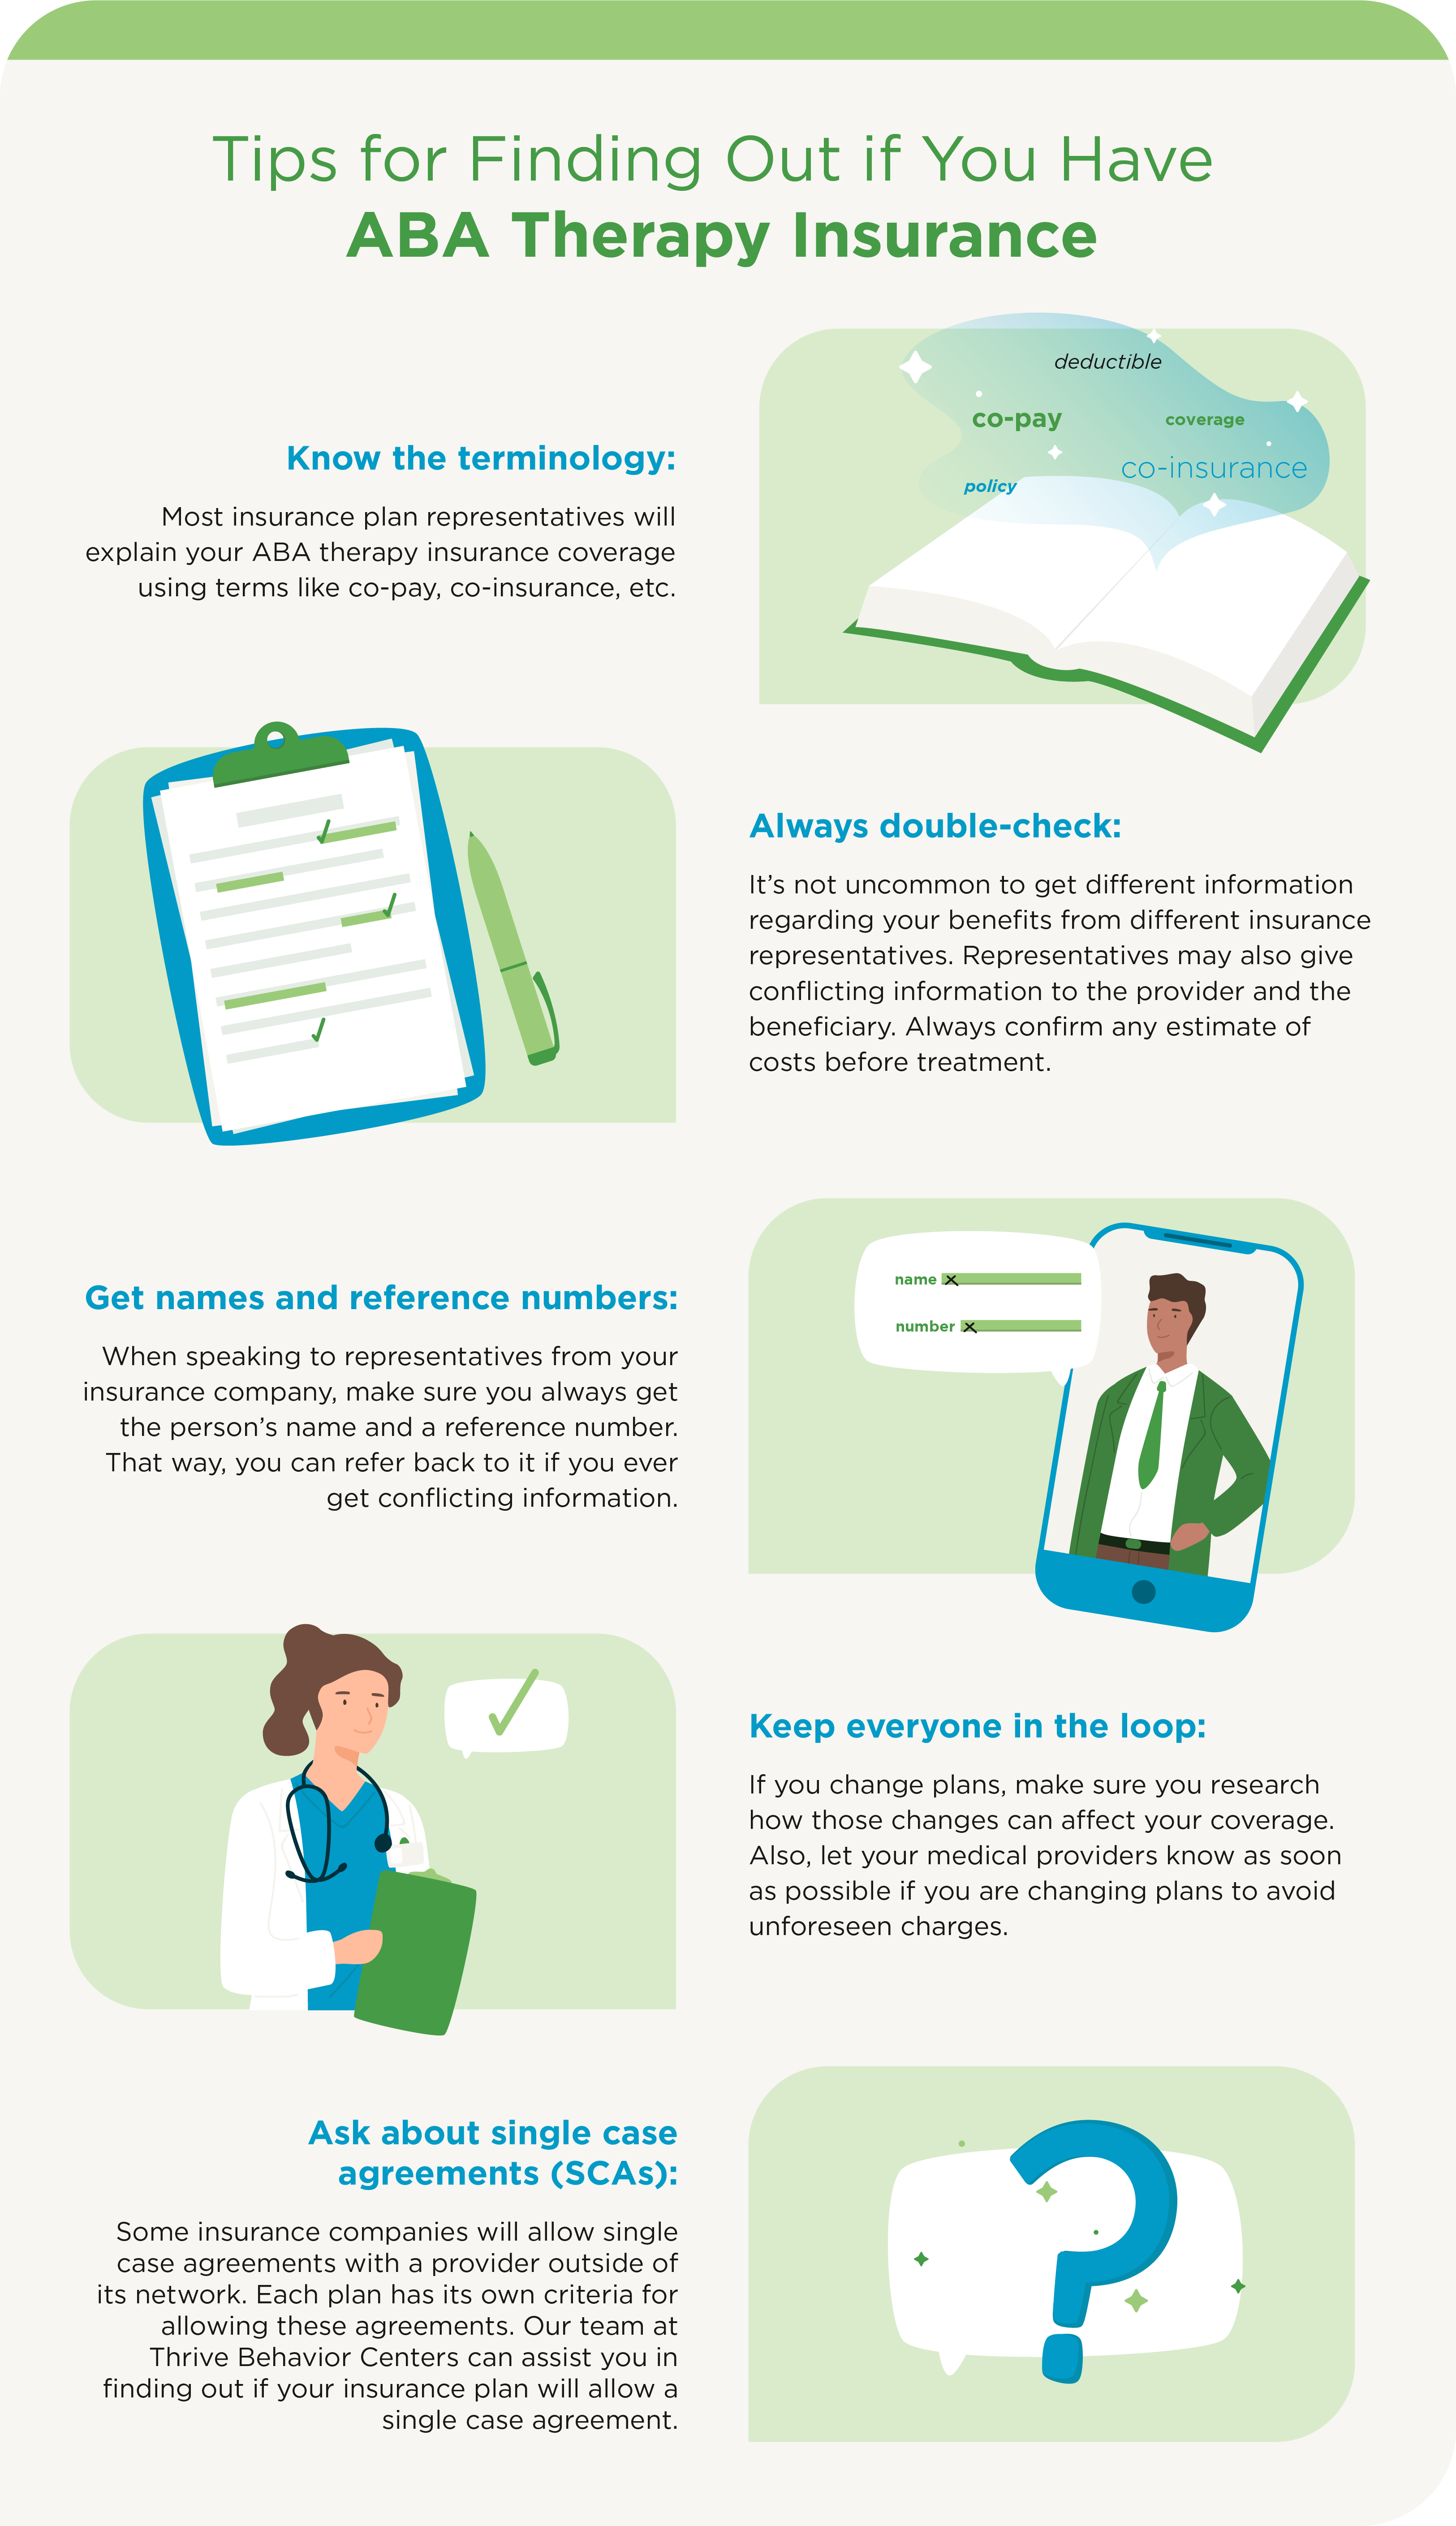 tips-for-requesting-aba-therapy-insurance-coverage-information-infographic